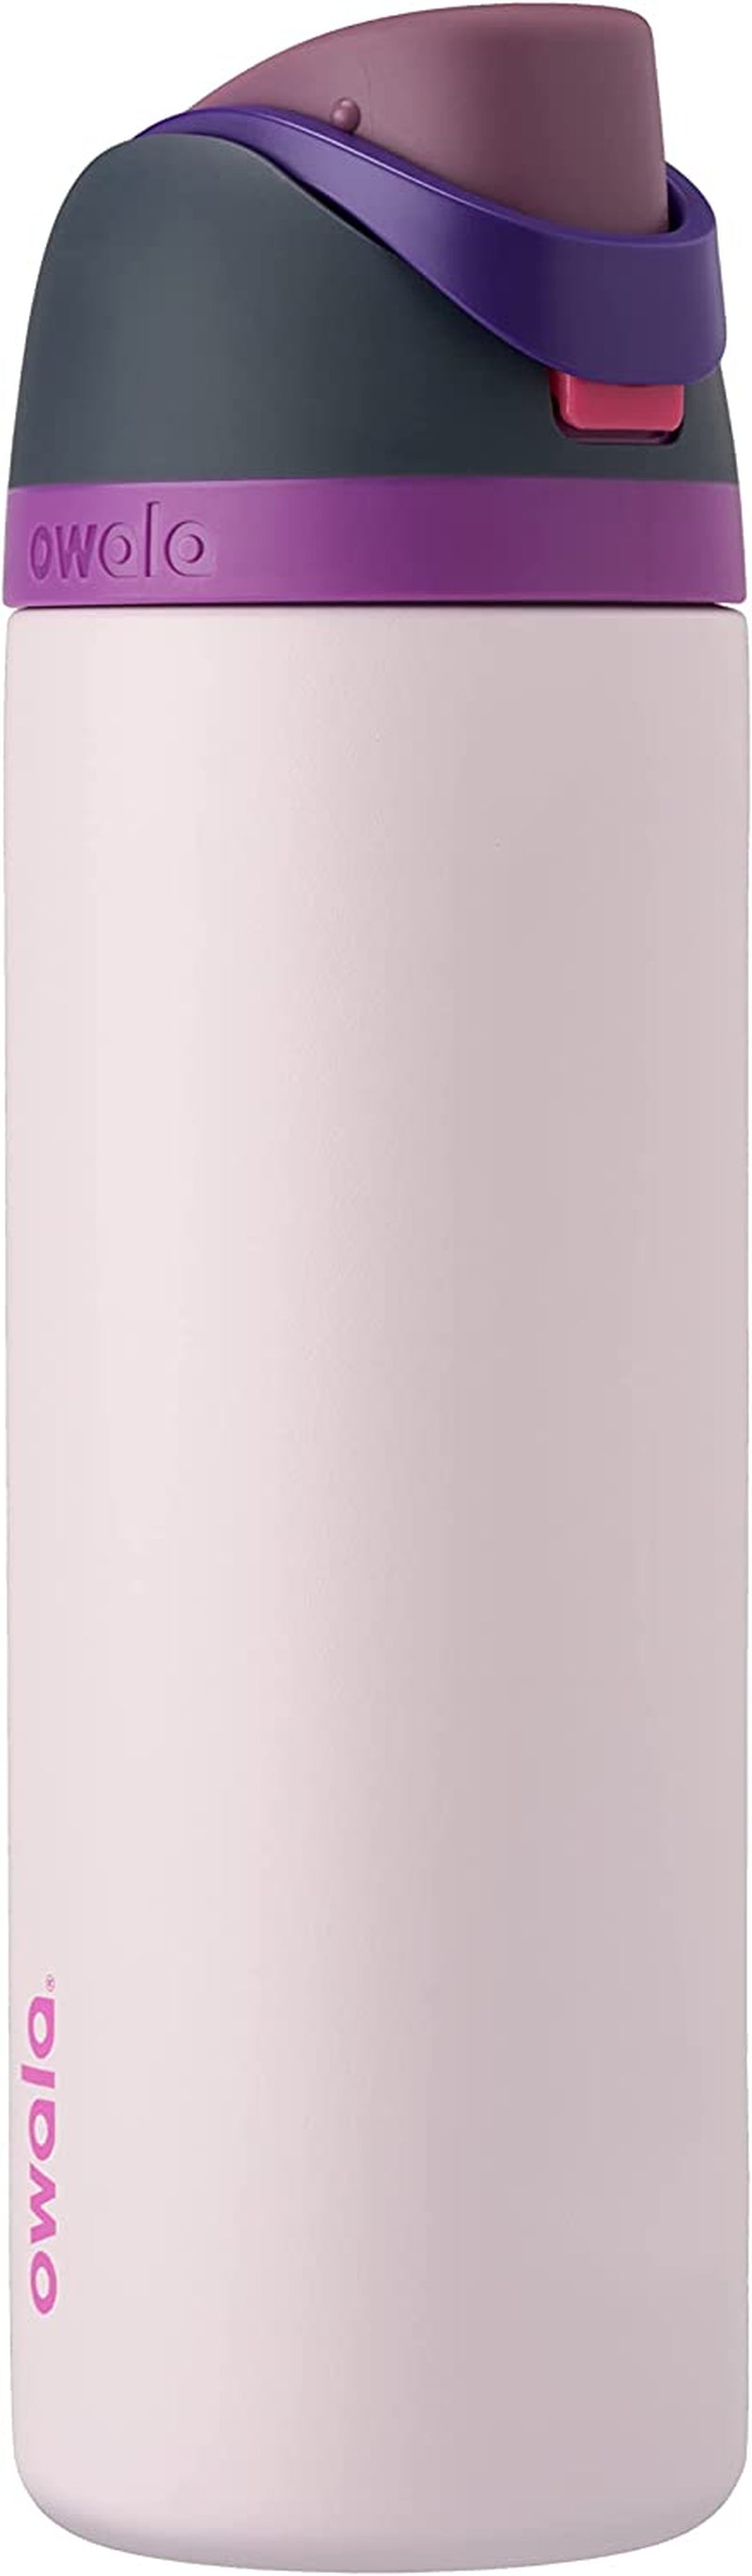 Freesip Insulated Stainless Steel Water Bottle with Straw for Sports and Travel, Bpa-Free, 24-Oz, Orchid/Orange (Tropical)